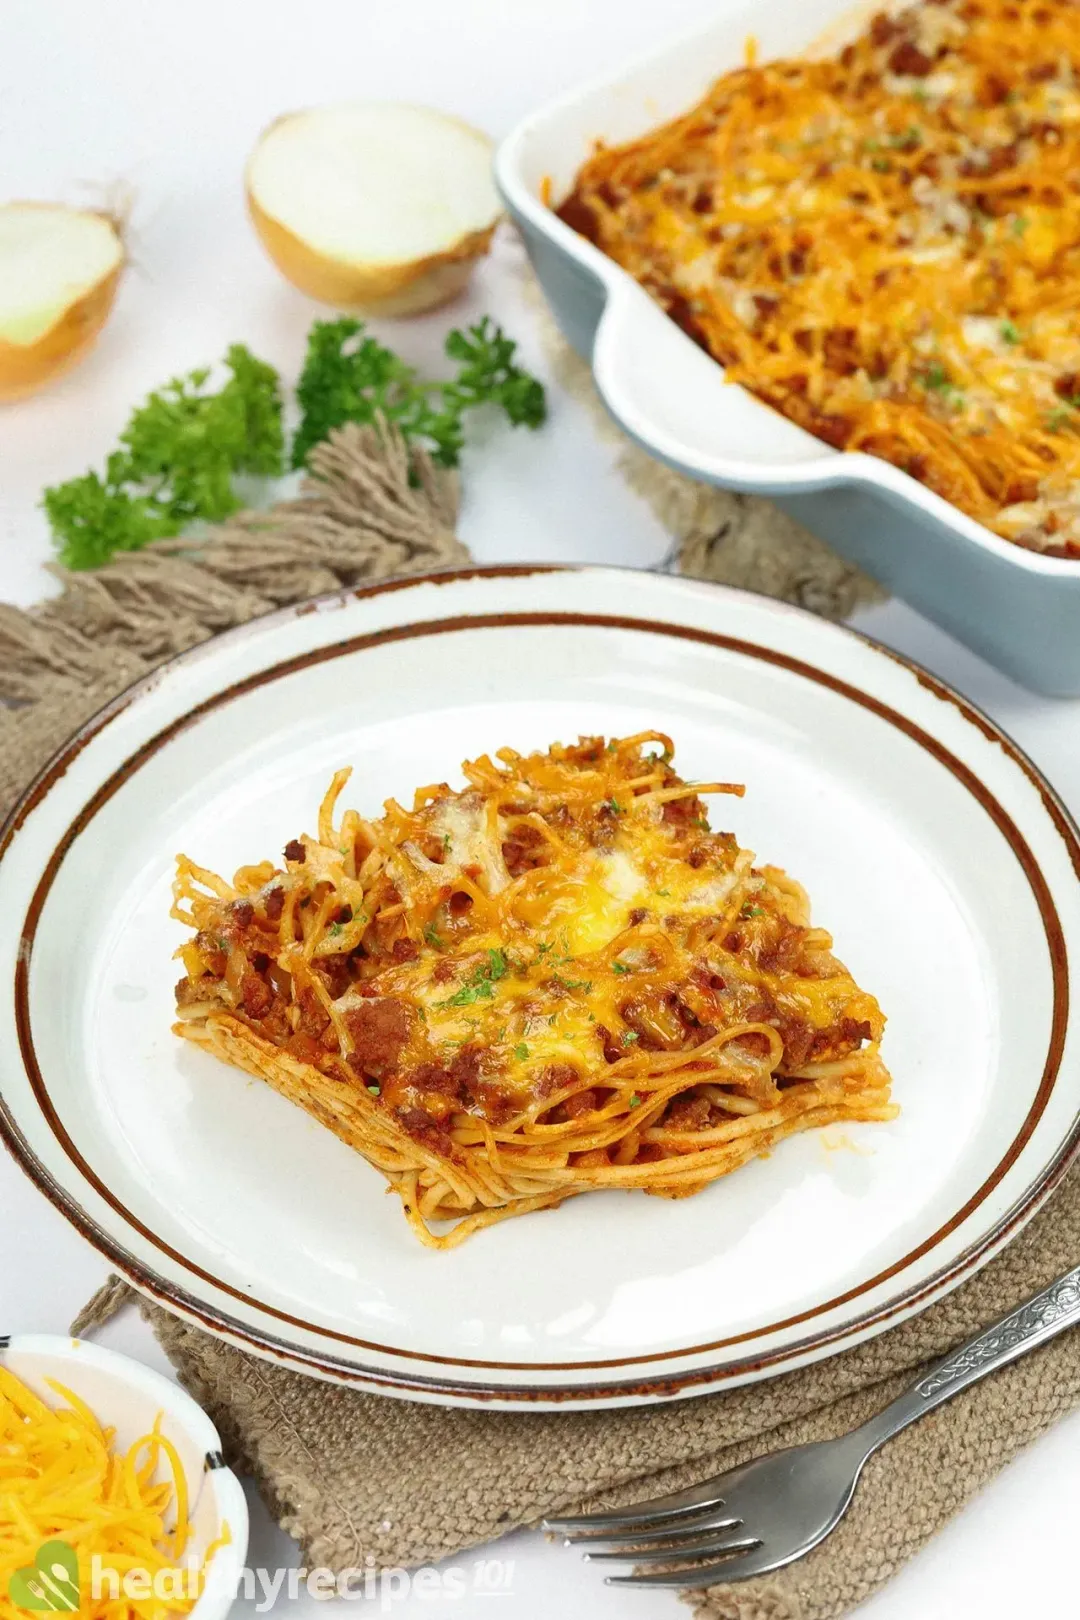 How to Store and Reheat Baked spaghetti